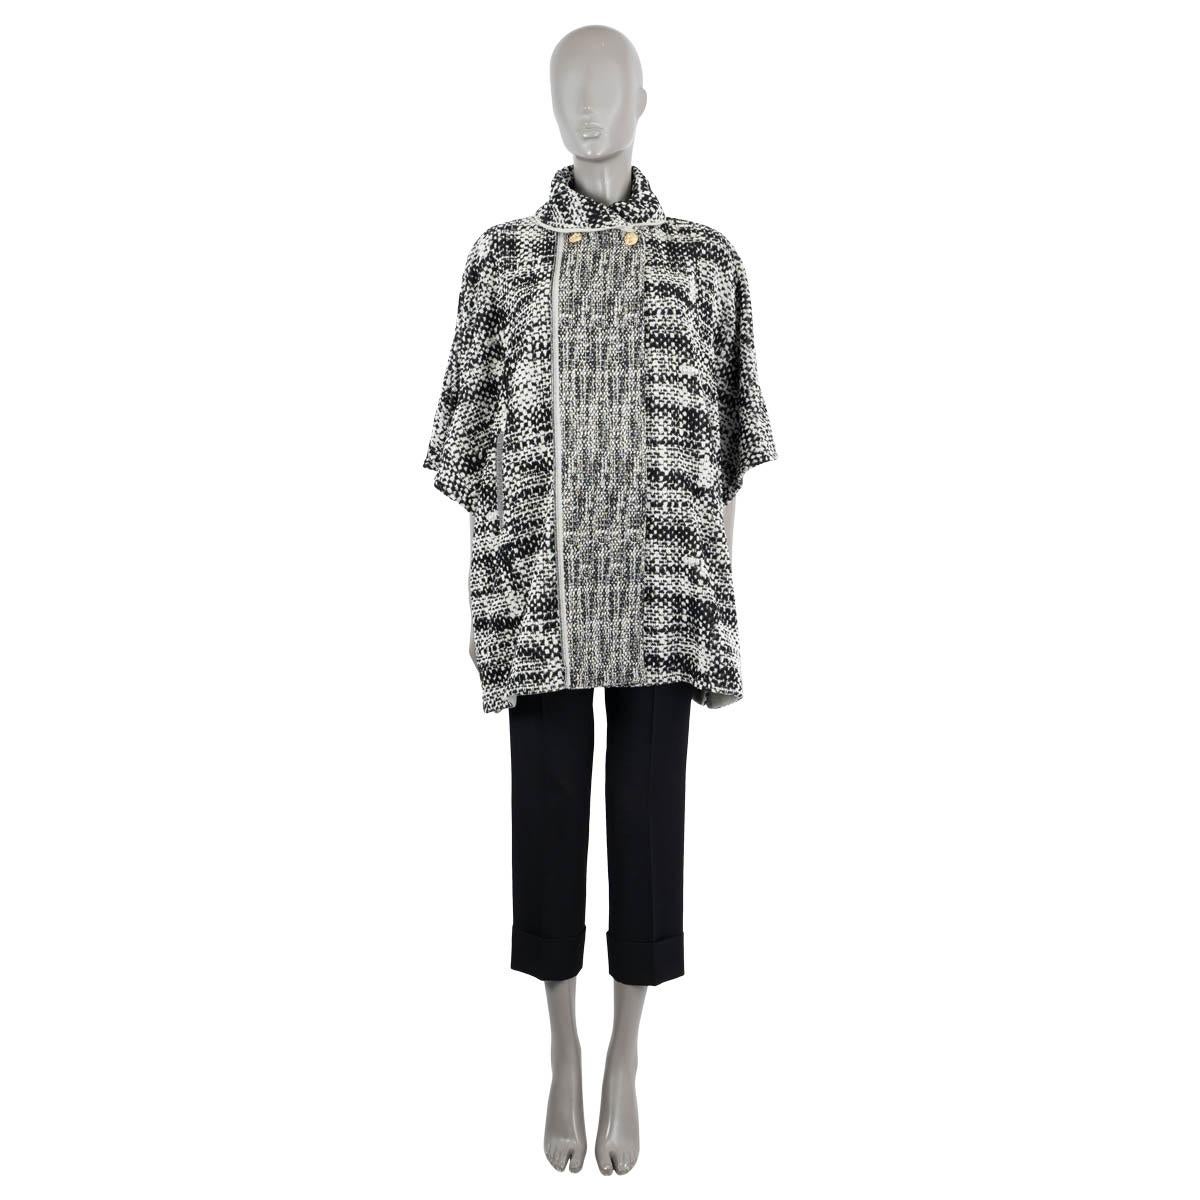 100% authentic Chanel tweed jacket in black and beige cotton (with 5% polyester). Features a shawl collar, short sleeves and a placket on the front with two gold head buttons. Buttons on the side for a poncho like effect. Unlined. Has been worn and